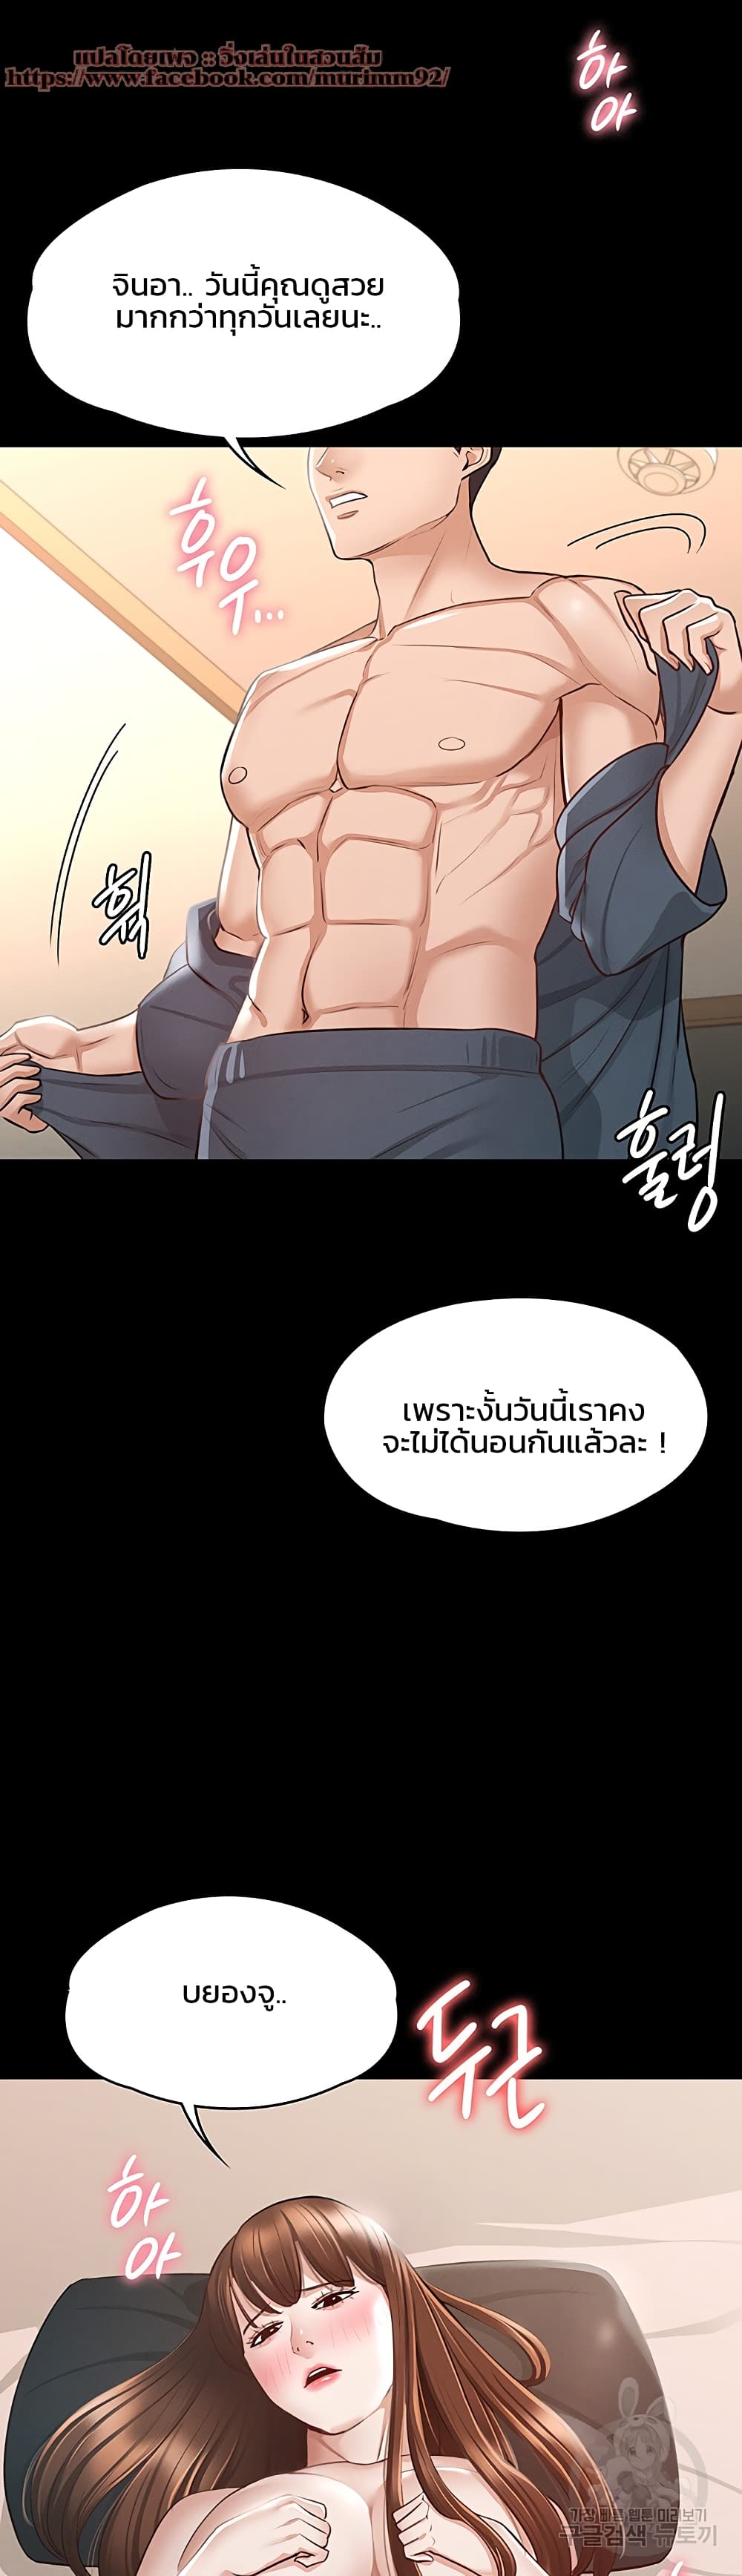 Workplace Manager Privileges ตอนที่ 9 ภาพ 21